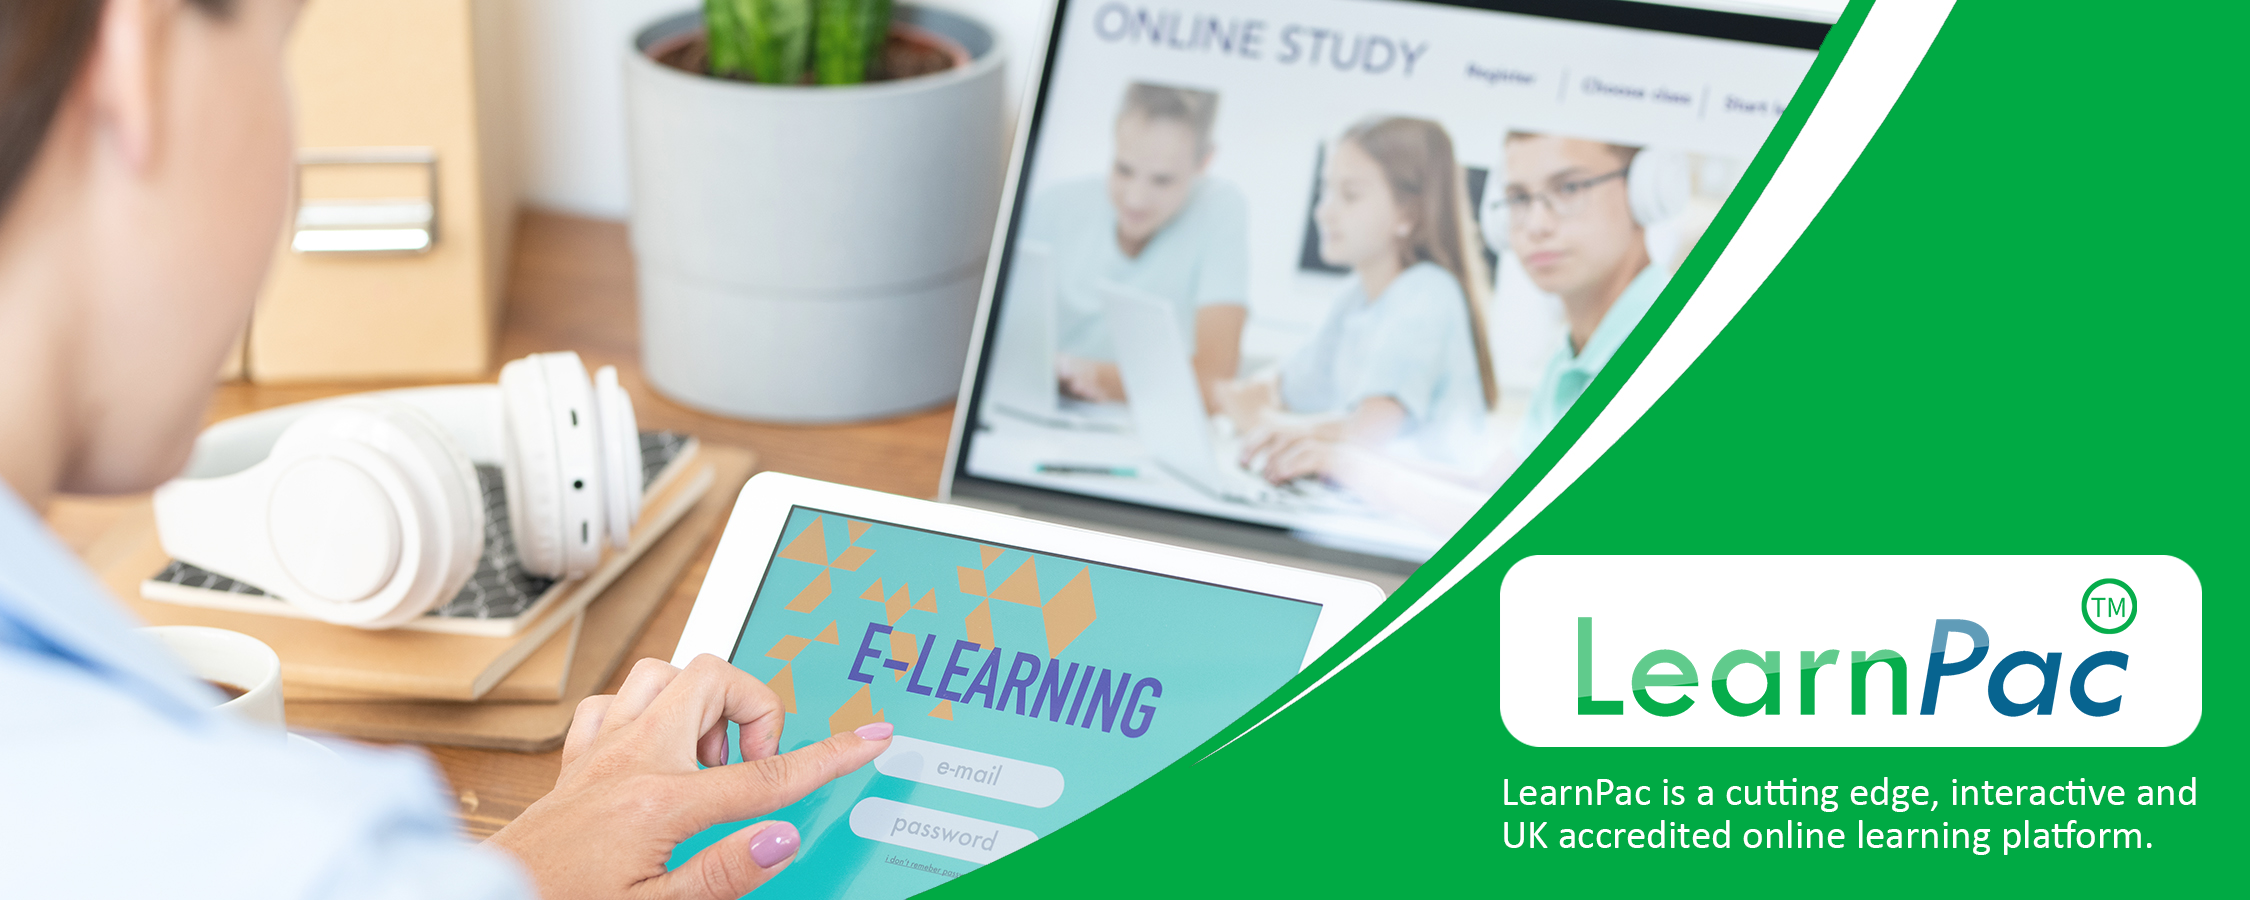 Understand the Importance of Mental Health in the Workplace - Online Learning Courses - E-Learning Courses - LearnPac Systems UK --